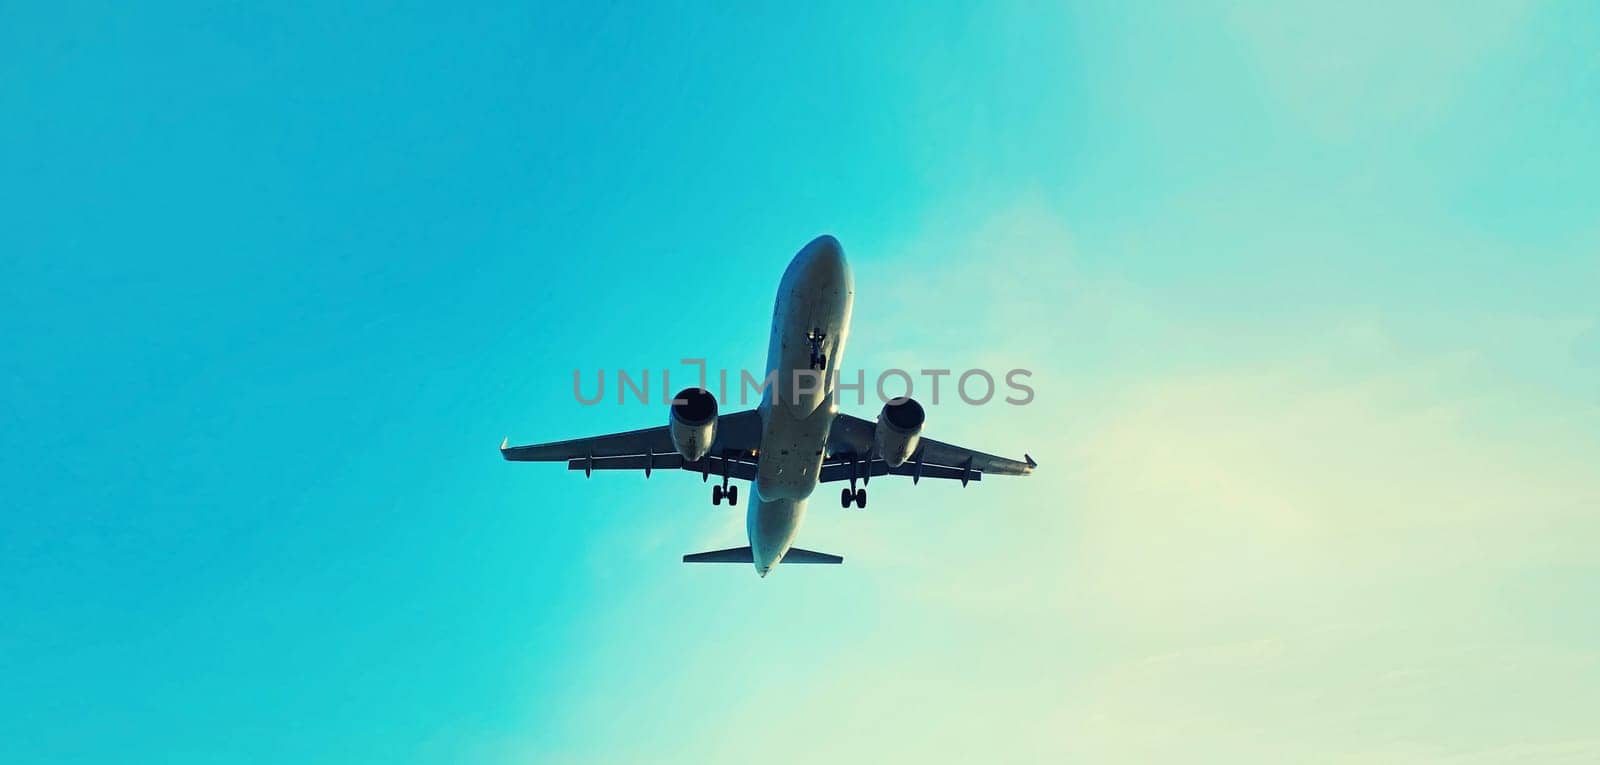 Passenger airplane flying in blue sky background